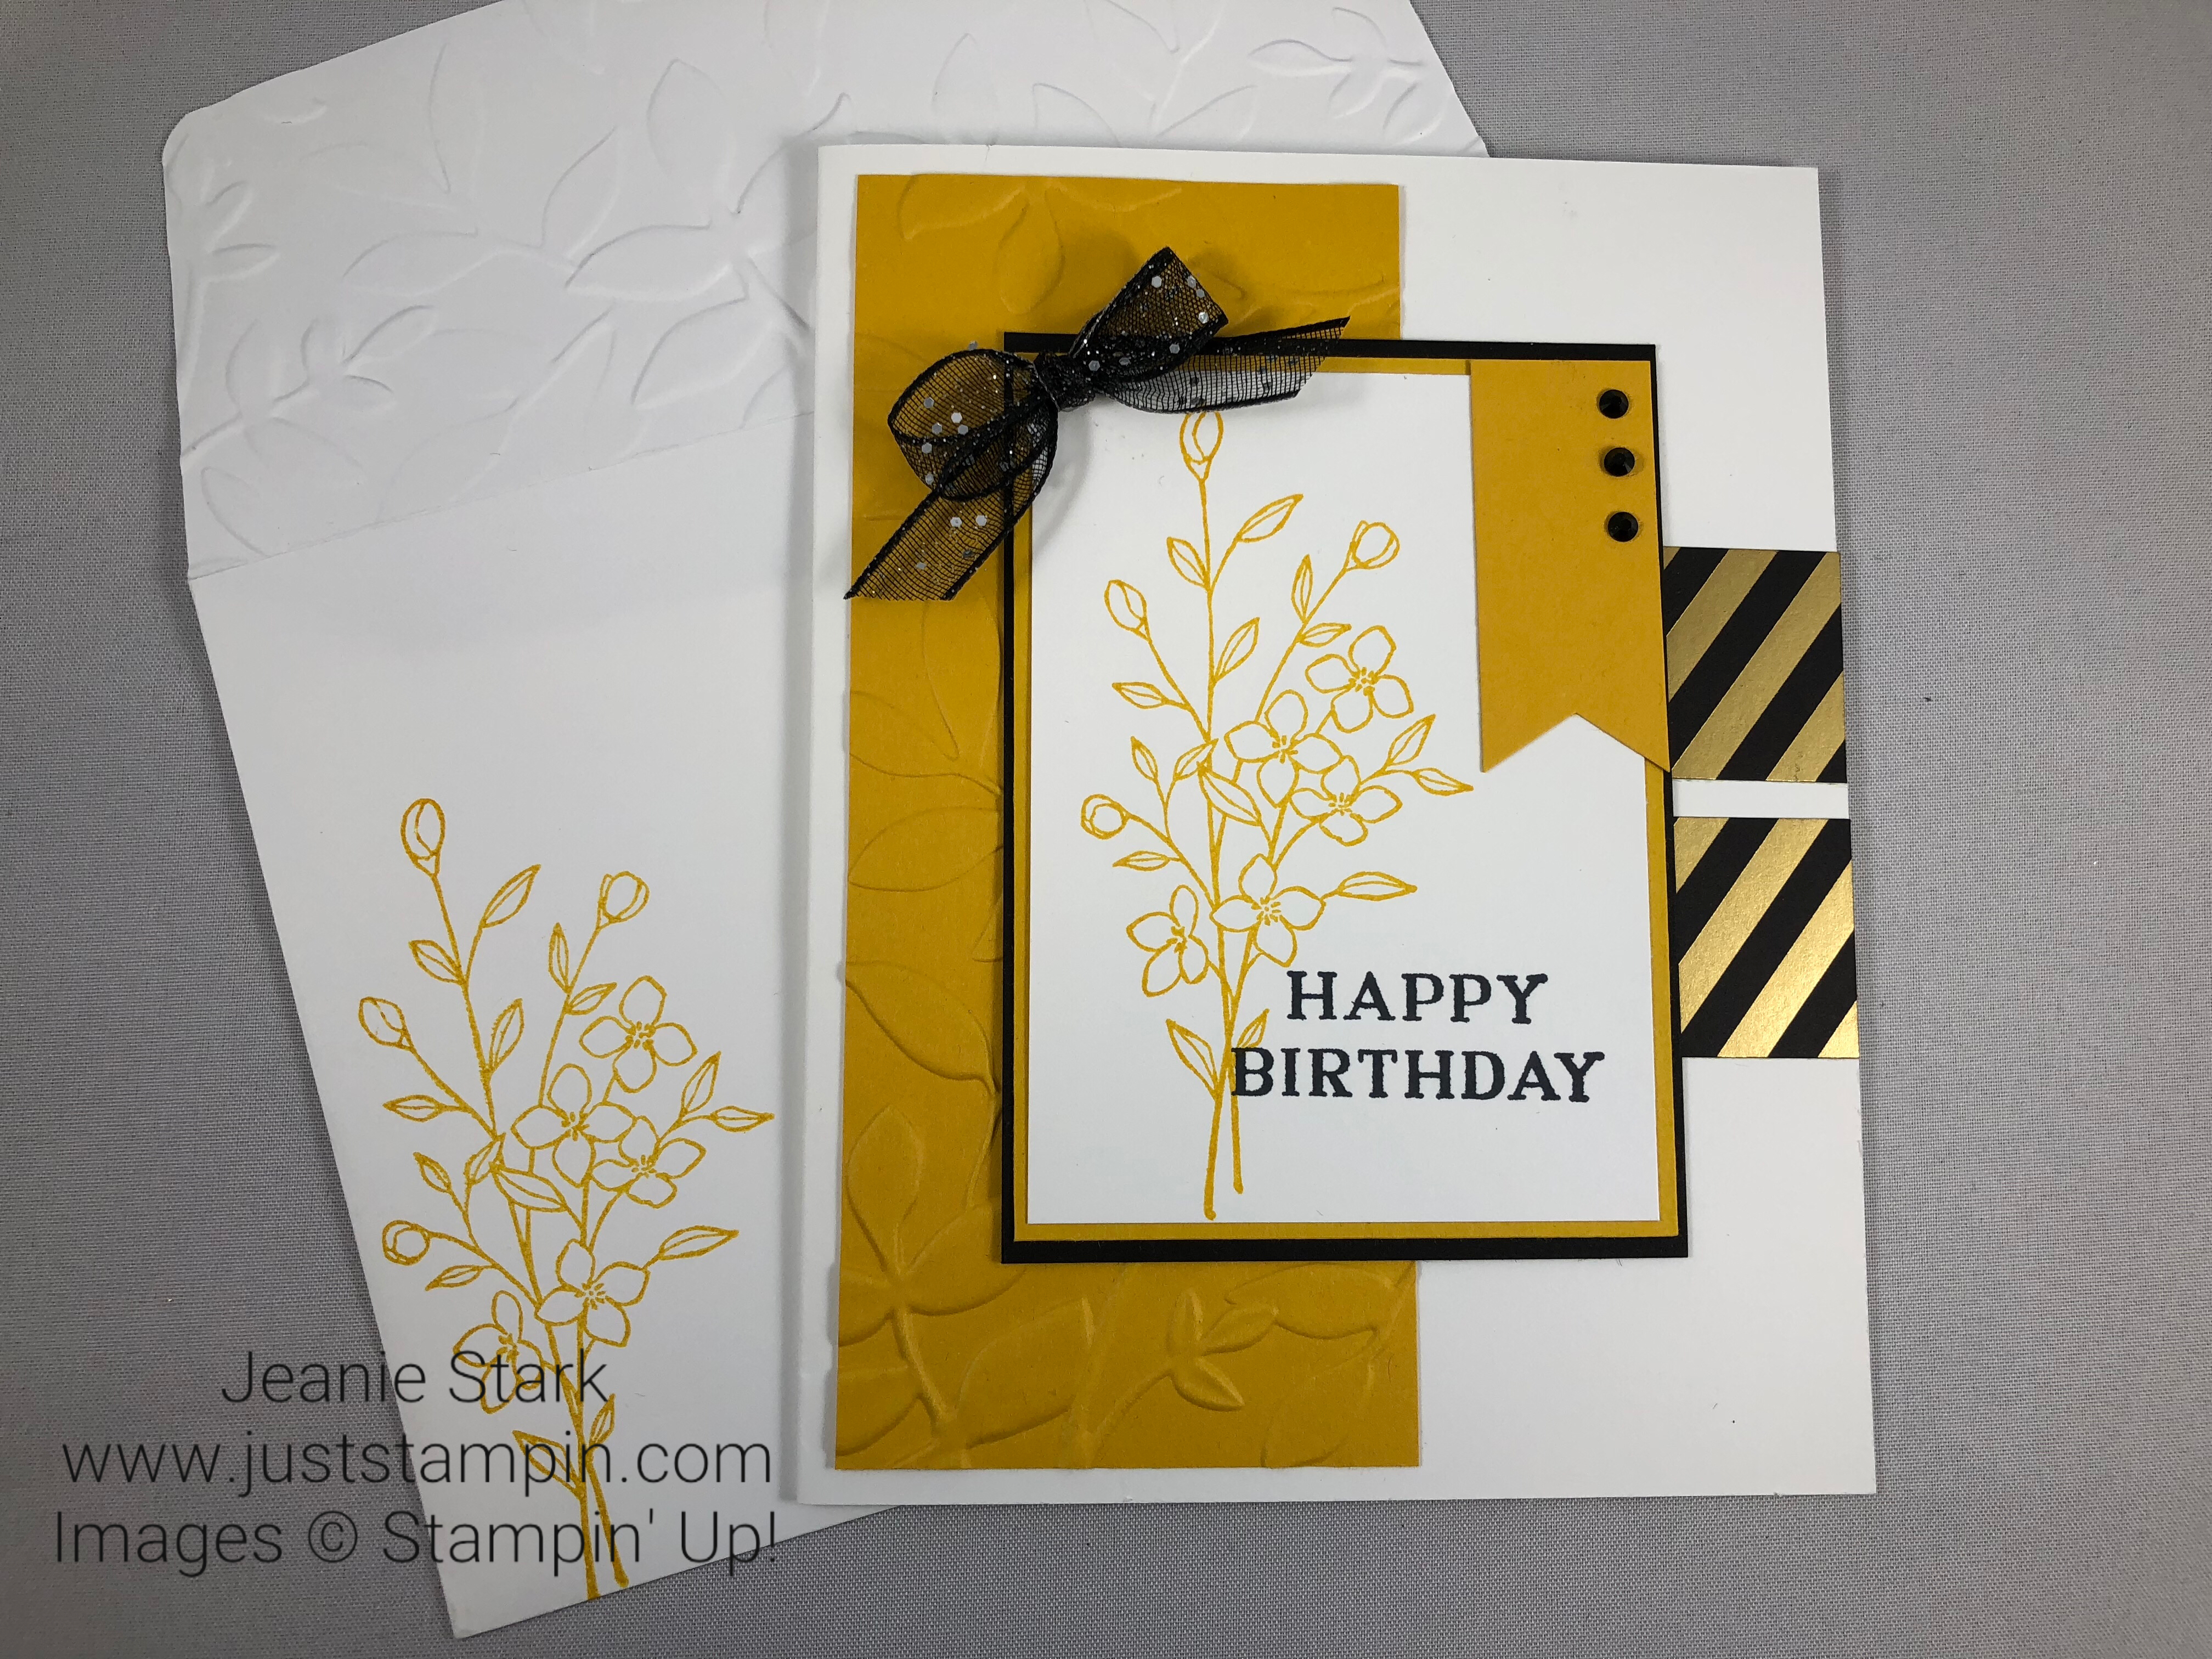 Stampin Up Touches of Texture and Perennial Birthday embossed Birthday card idea - Jeanie Stark StampinUp